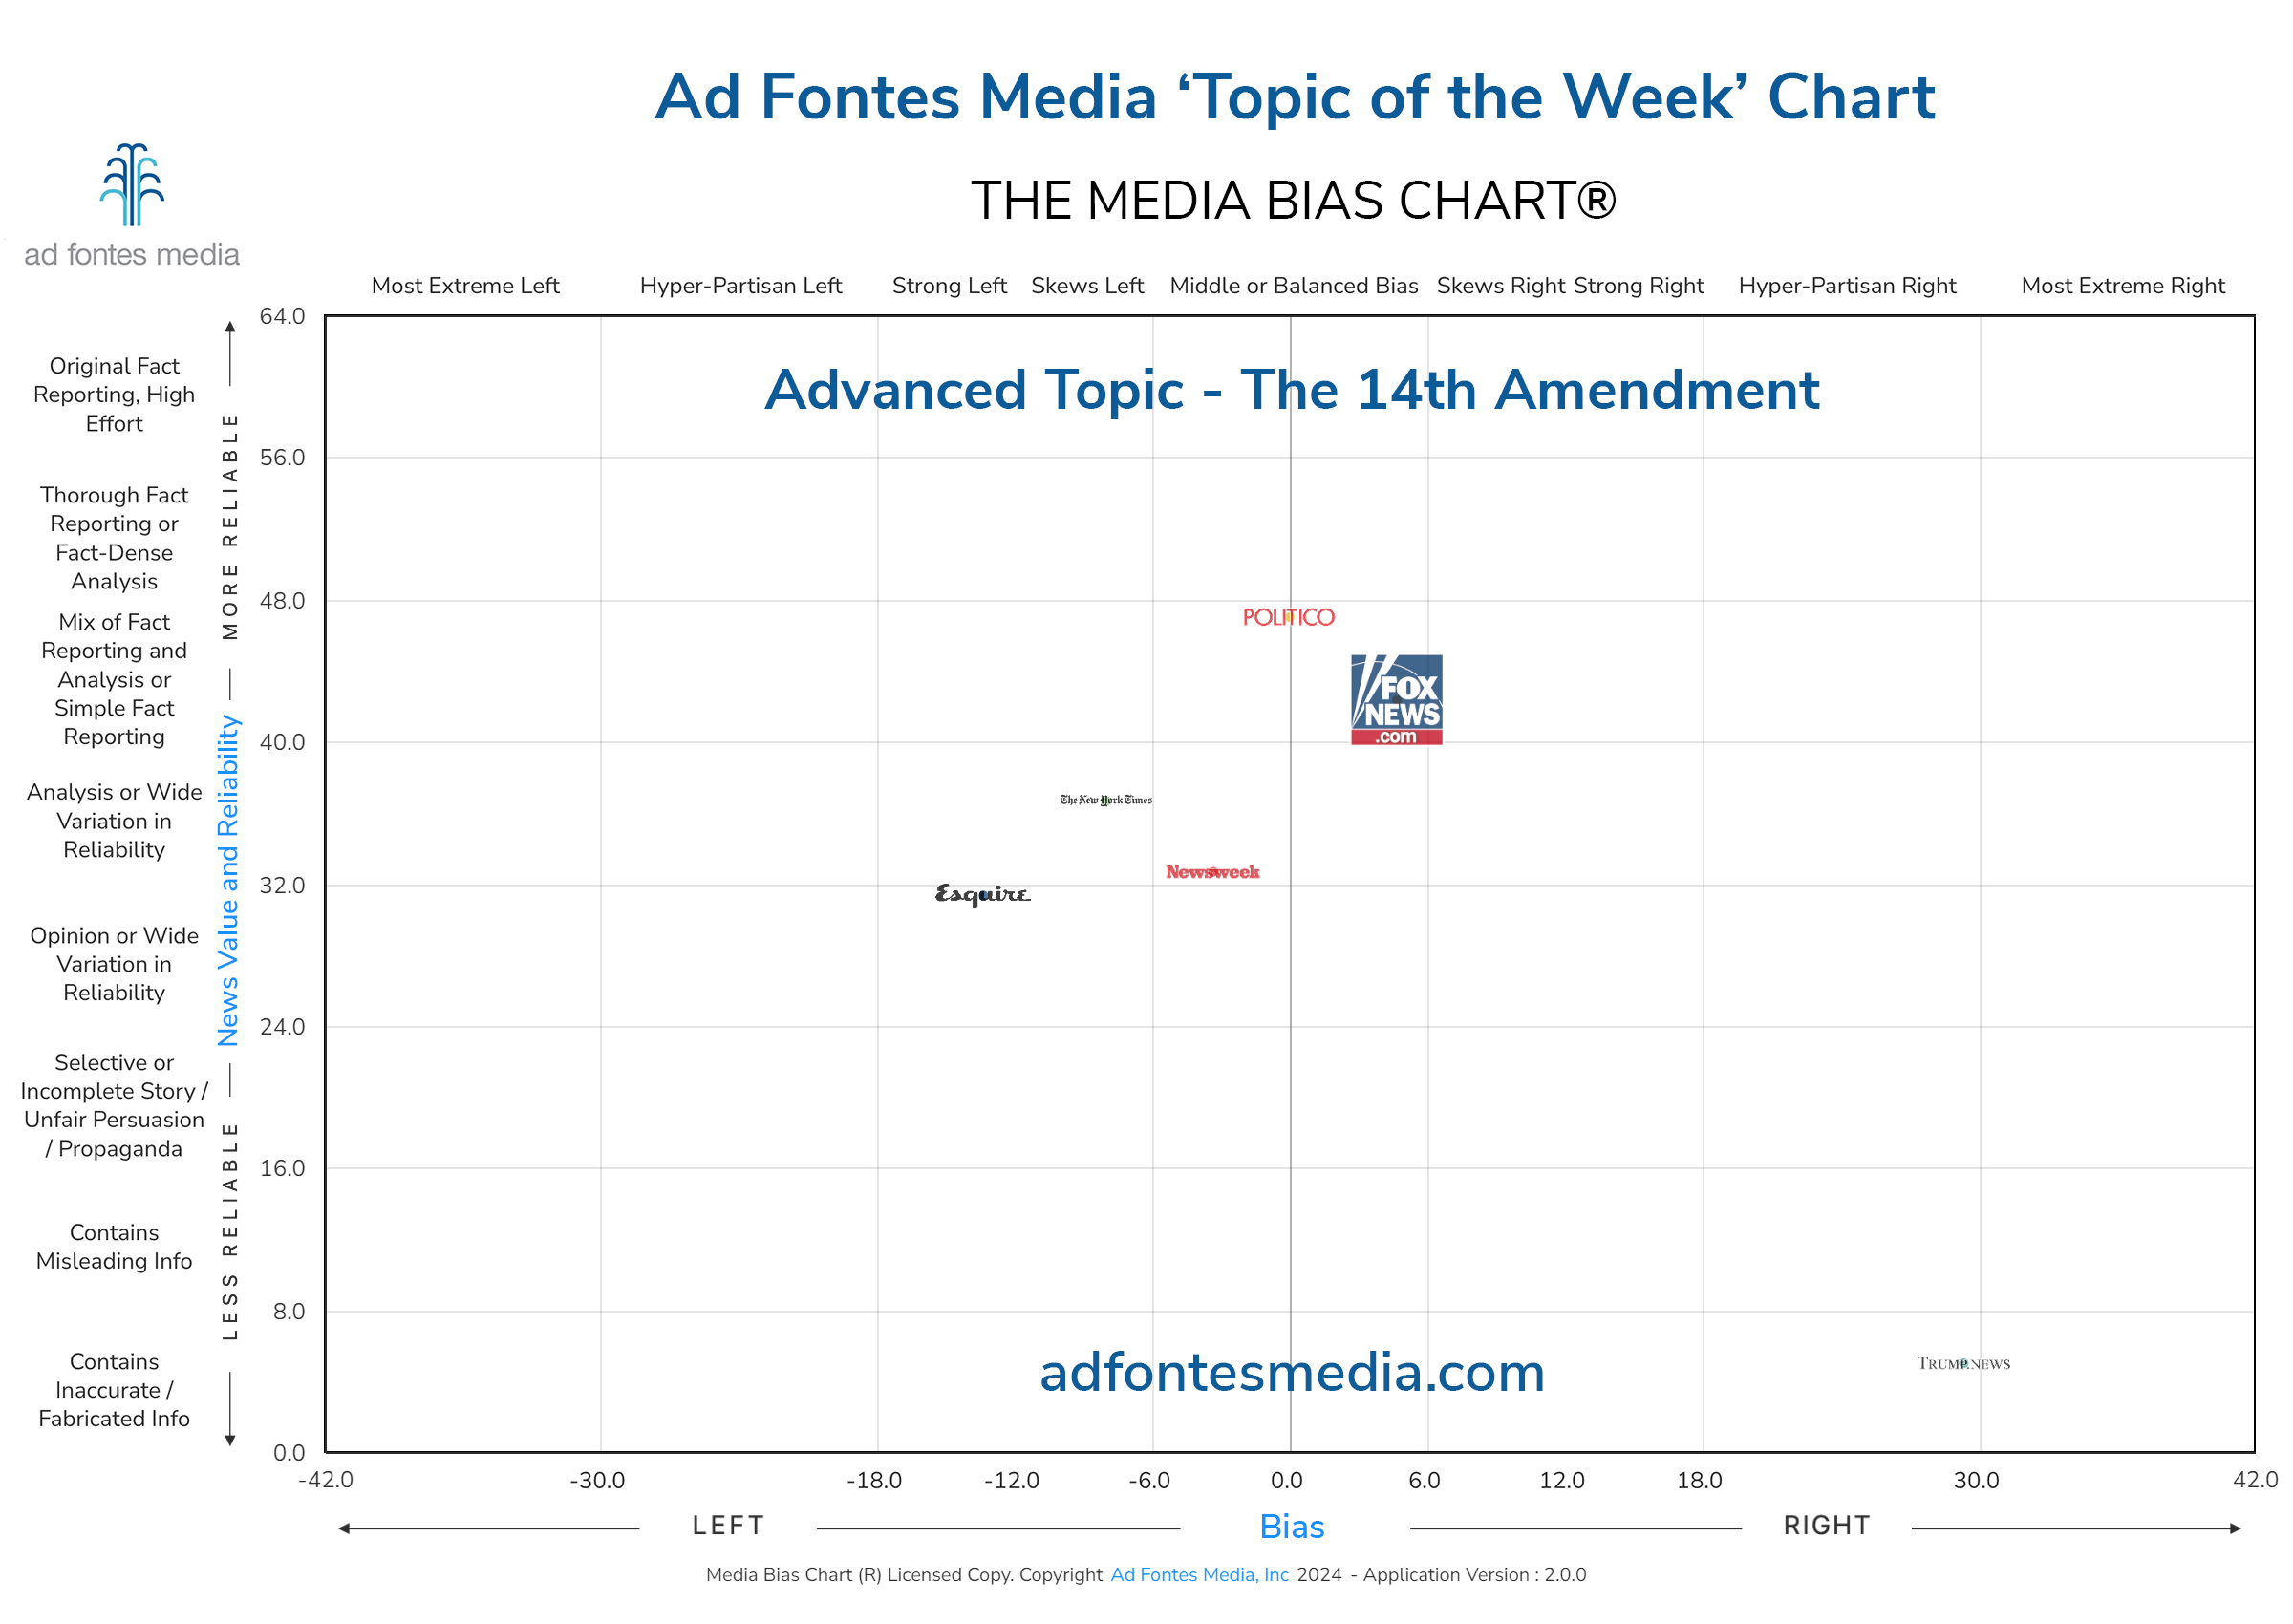 Ad Fontes Media analysts examine coverage of Trump vs. 14th Amendment in Media Bias Chart's Topic of the Week